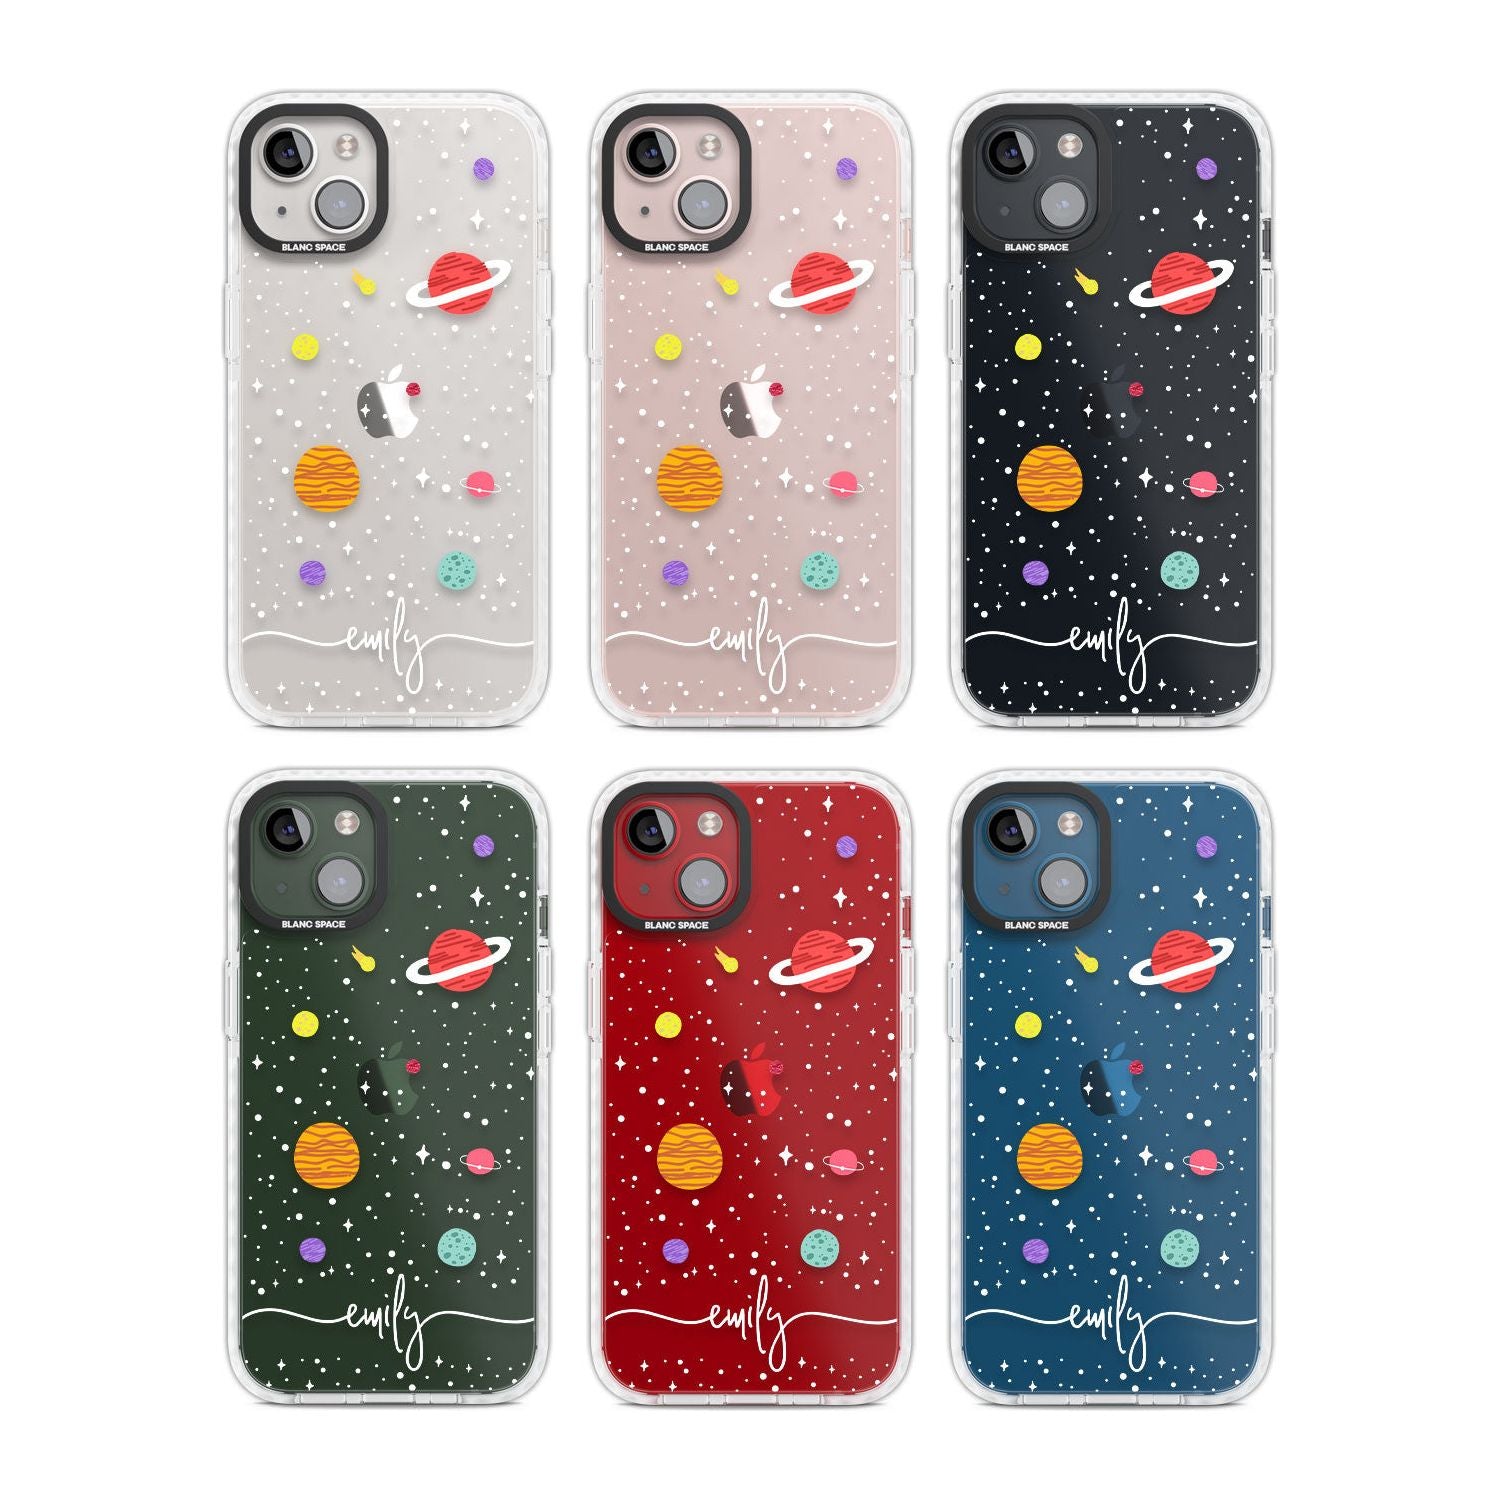 Personalised Cute Cartoon Planets (Clear) Phone Case iPhone 15 Pro Max / Black Impact Case,iPhone 15 Plus / Black Impact Case,iPhone 15 Pro / Black Impact Case,iPhone 15 / Black Impact Case,iPhone 15 Pro Max / Impact Case,iPhone 15 Plus / Impact Case,iPhone 15 Pro / Impact Case,iPhone 15 / Impact Case,iPhone 15 Pro Max / Magsafe Black Impact Case,iPhone 15 Plus / Magsafe Black Impact Case,iPhone 15 Pro / Magsafe Black Impact Case,iPhone 15 / Magsafe Black Impact Case,iPhone 14 Pro Max / Black Impact Case,iP